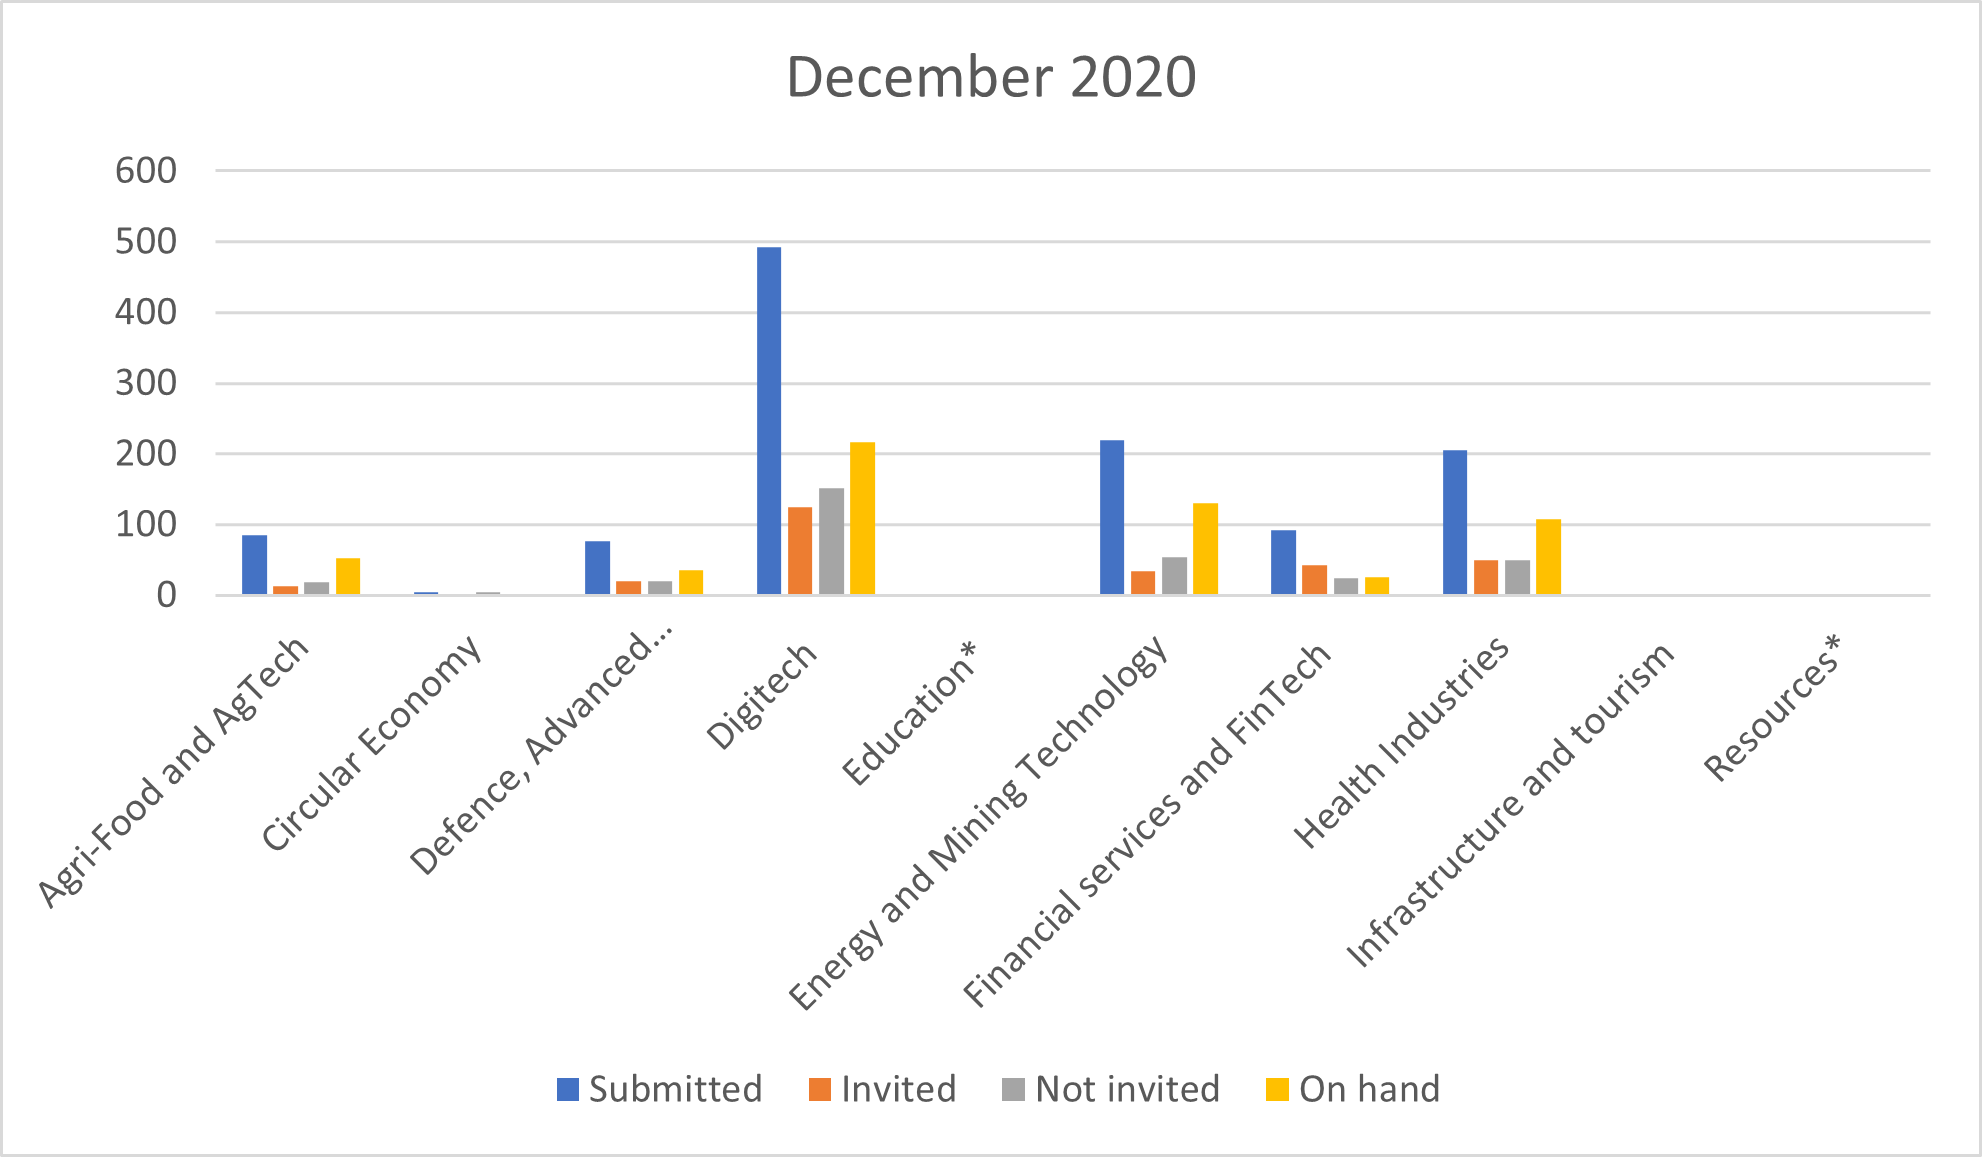 Number of EOIs on hand invited and submitted for global Talent Visa program until December 2020